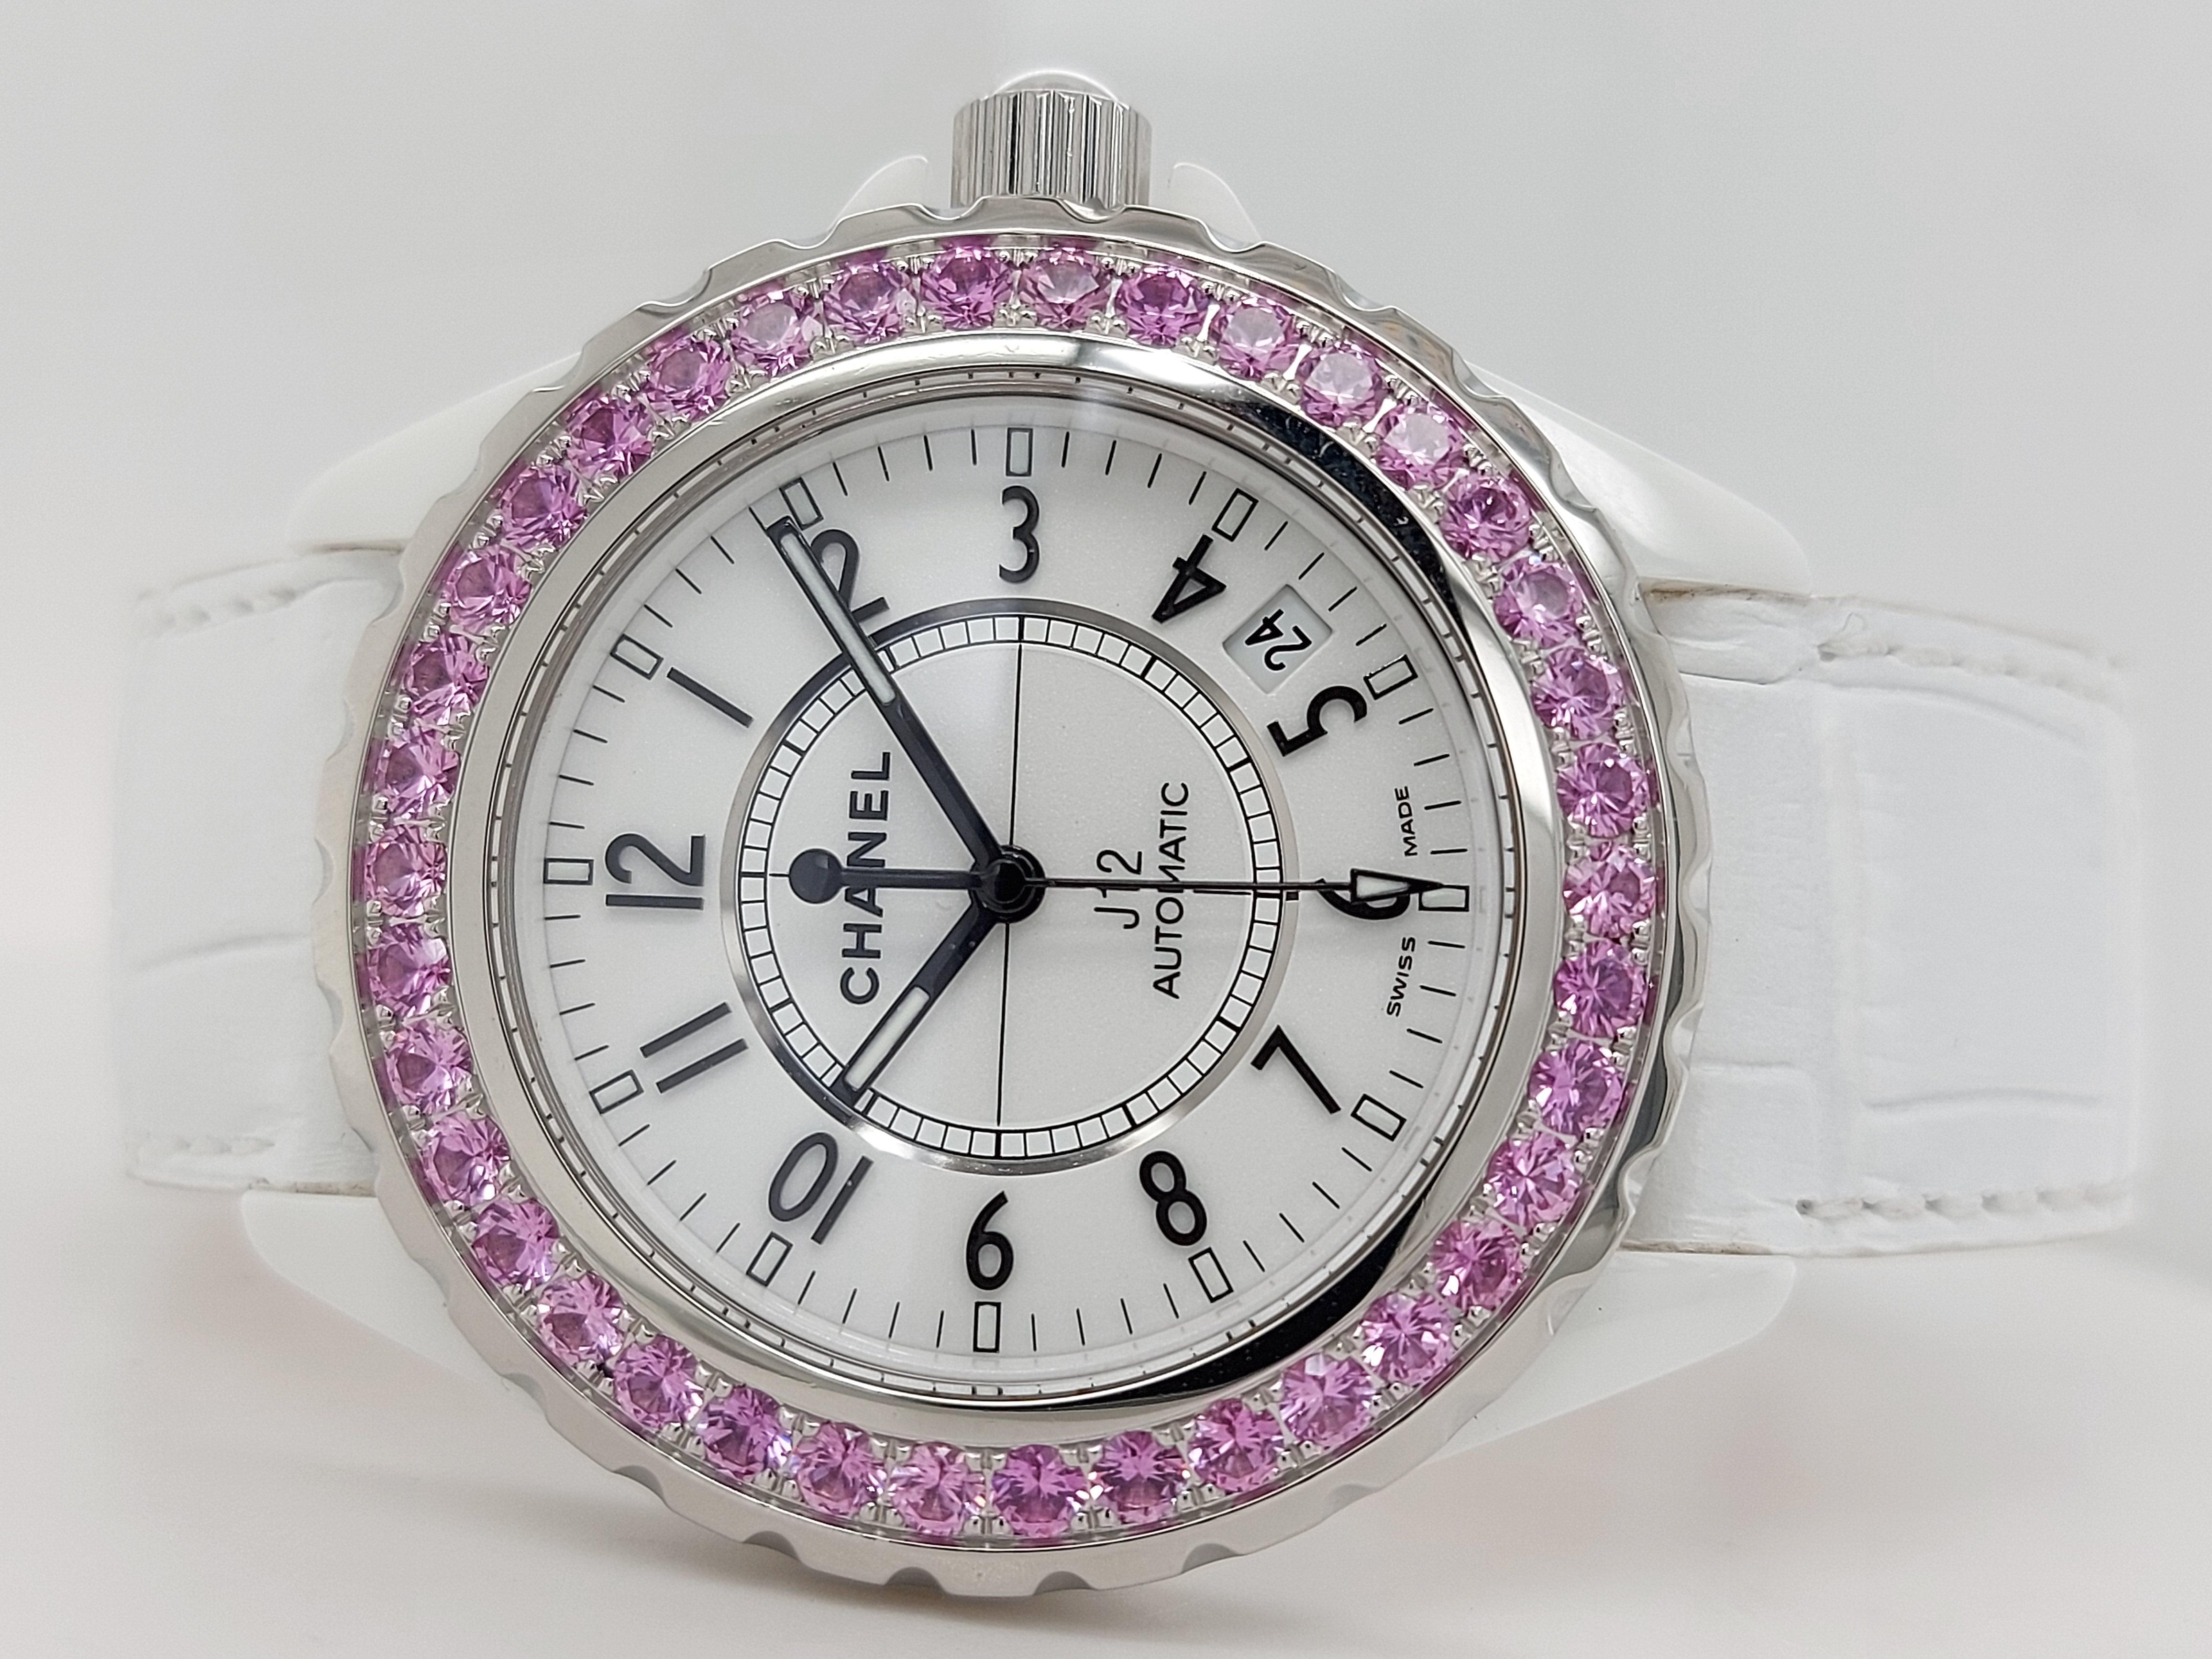 Chanel J12, Automatic, Ceramic Case, with Pink Sapphires 9